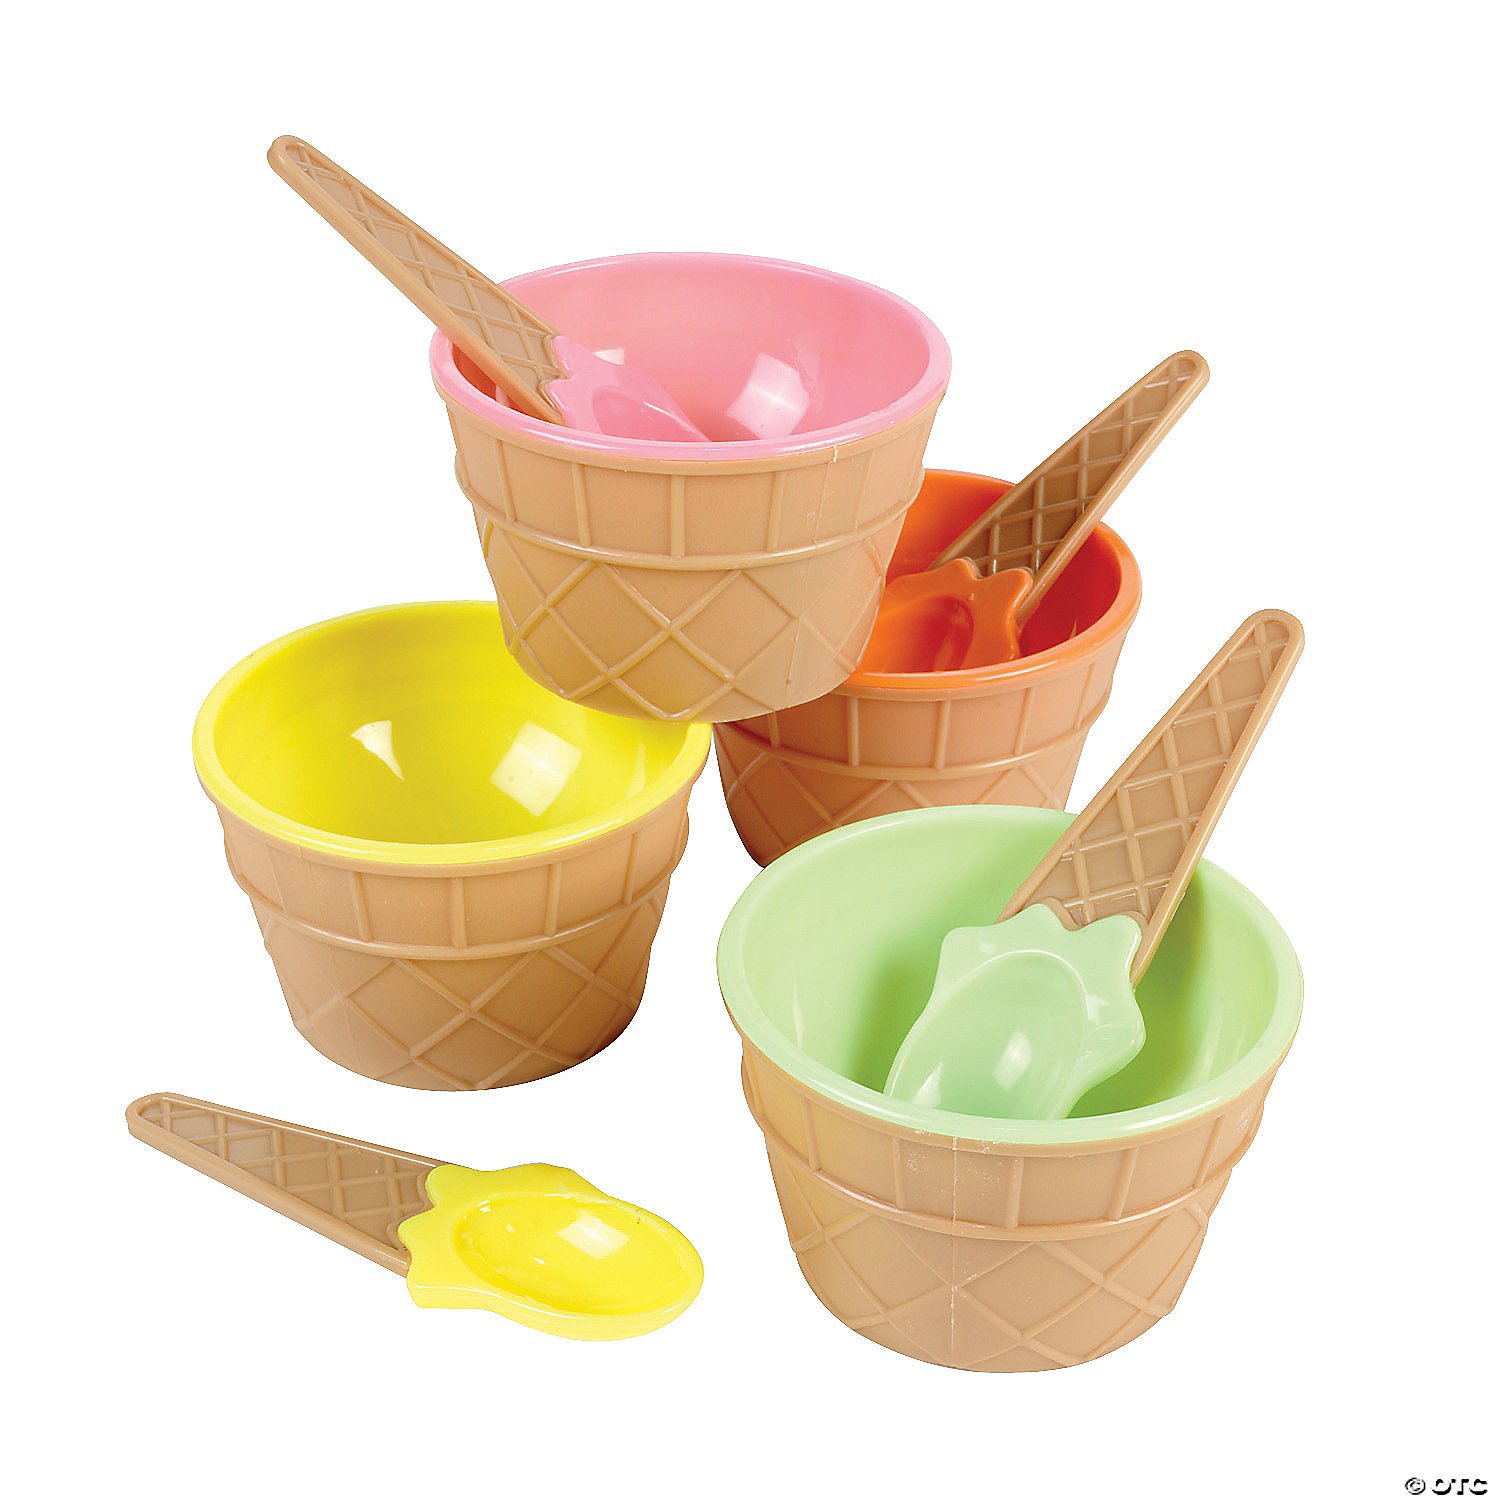 Cute Interesting Child Ice Cream Shaped Bowl And Spoon Gift Dessert Food ONE